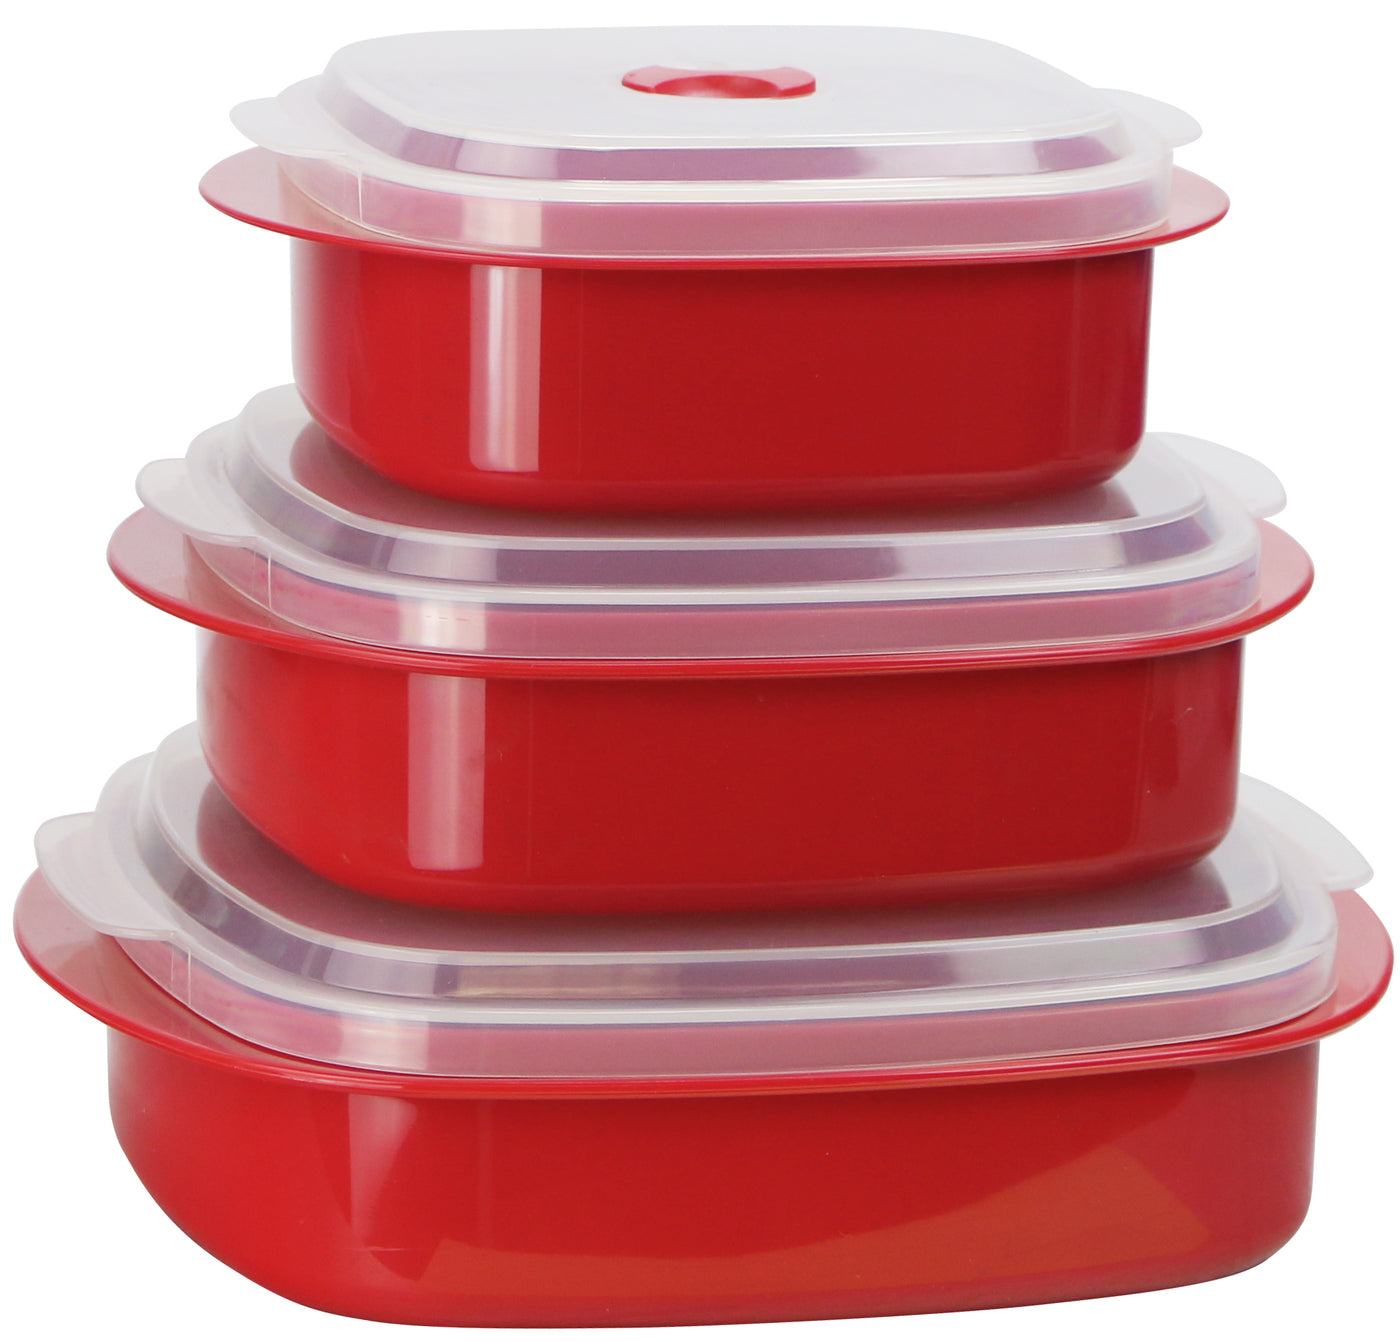 Food Storage Containers with Lids - Plastic Nesting Containers for Food -  BPA Free Stackable Storage Containers for Kitchen - Pink Microwave Safe Leftover  Container Set 